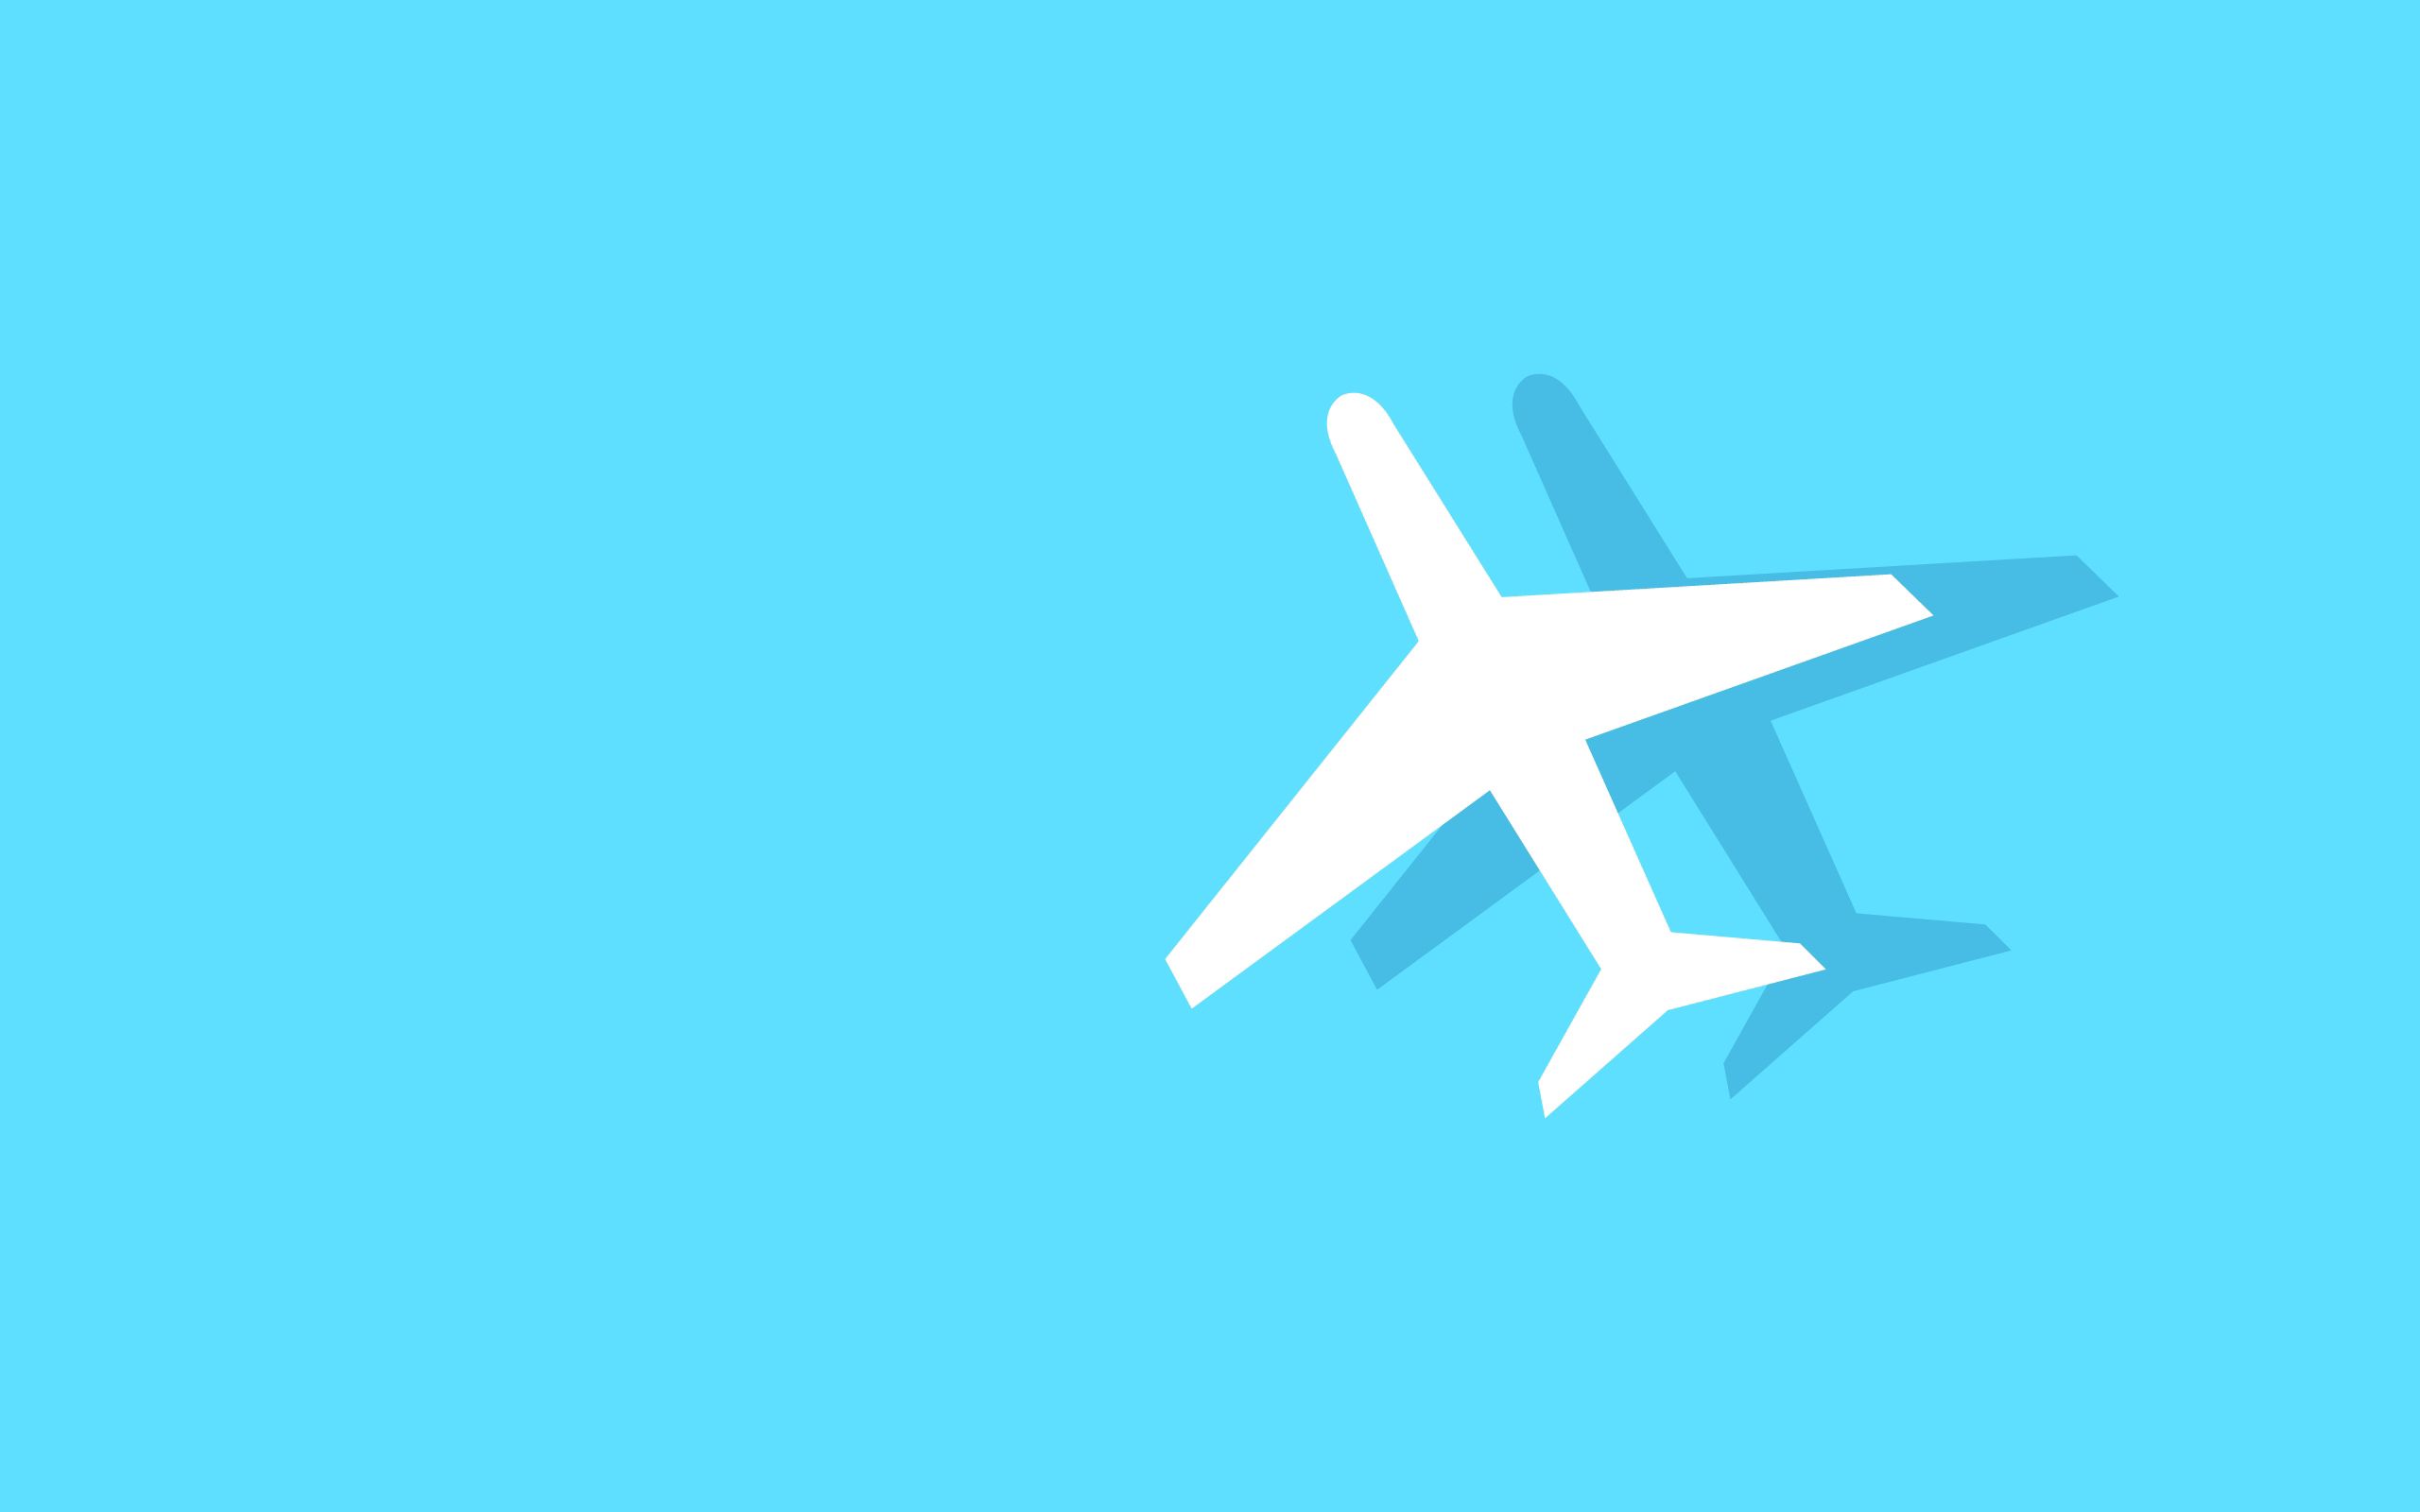 graphics, picture, plane, vector, drawing, shadow, airplane Full HD